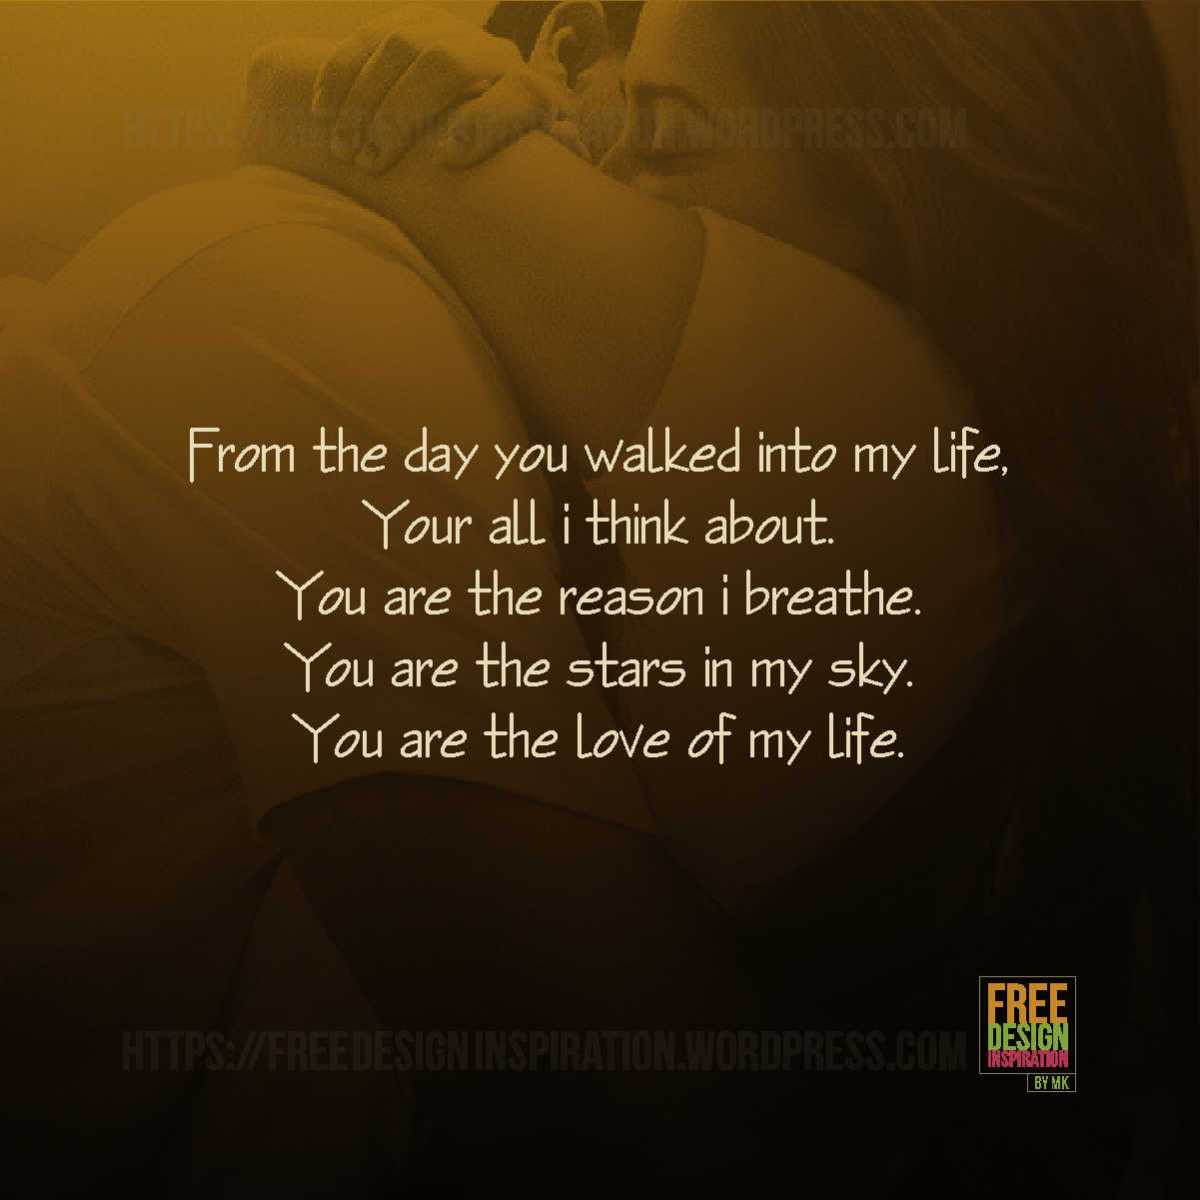 Love Of Your Life Quote
 You are love of my life – Free Design Inspiration